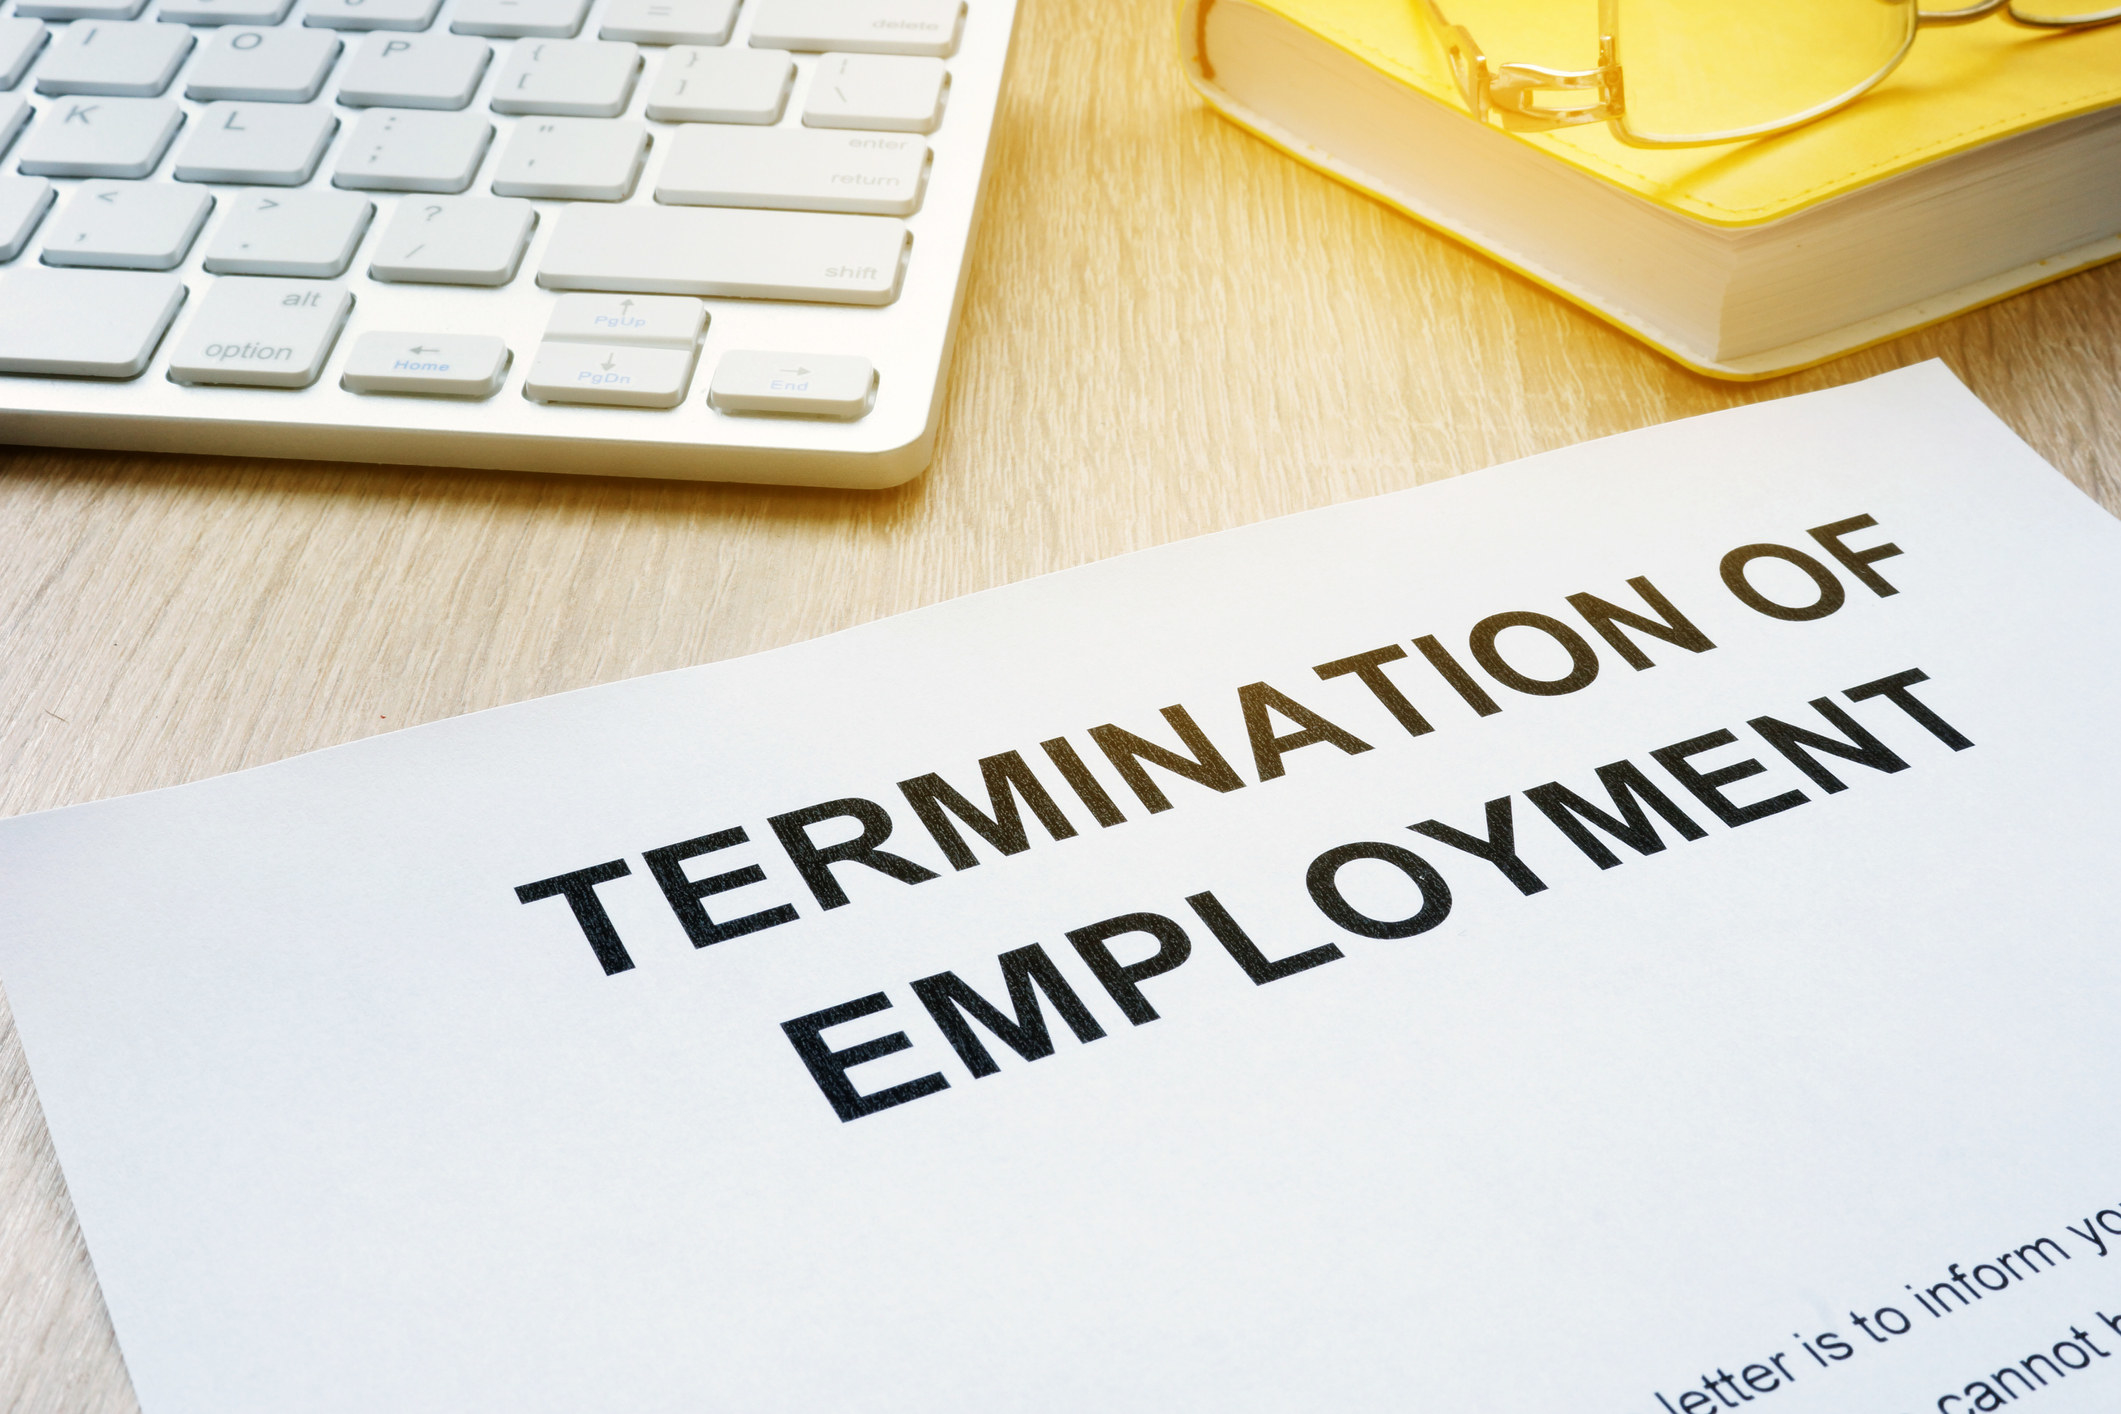 Termination of employment sheet on office desk